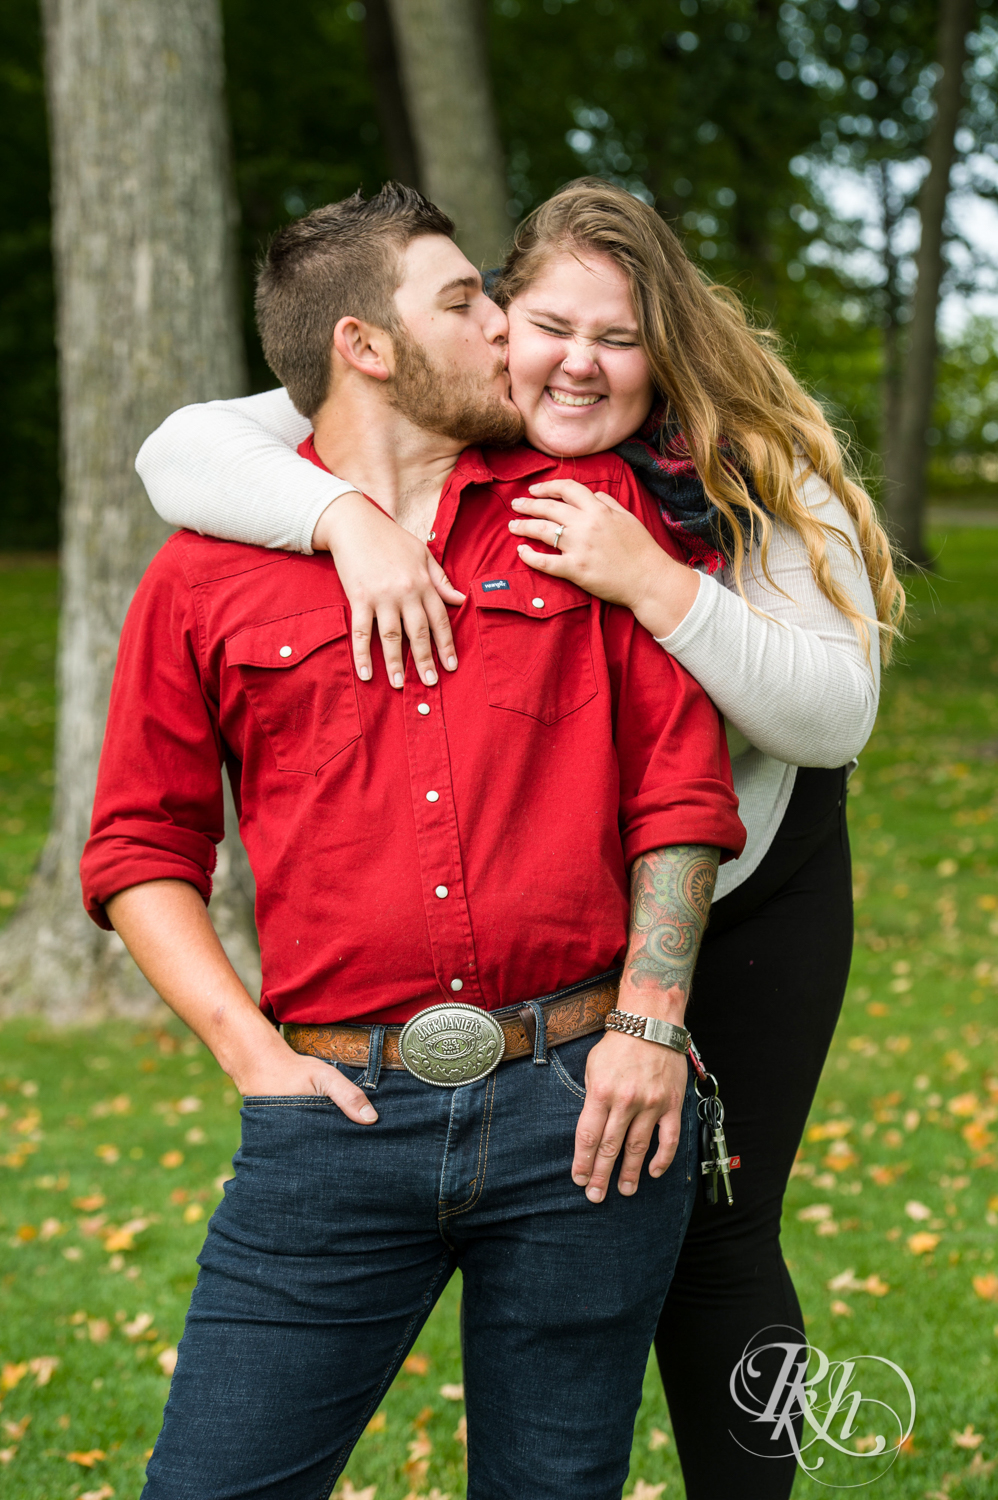 Man and woman in jeans and dress shirts kiss at Hilde Performance Center in Plymouth, Minnesota.